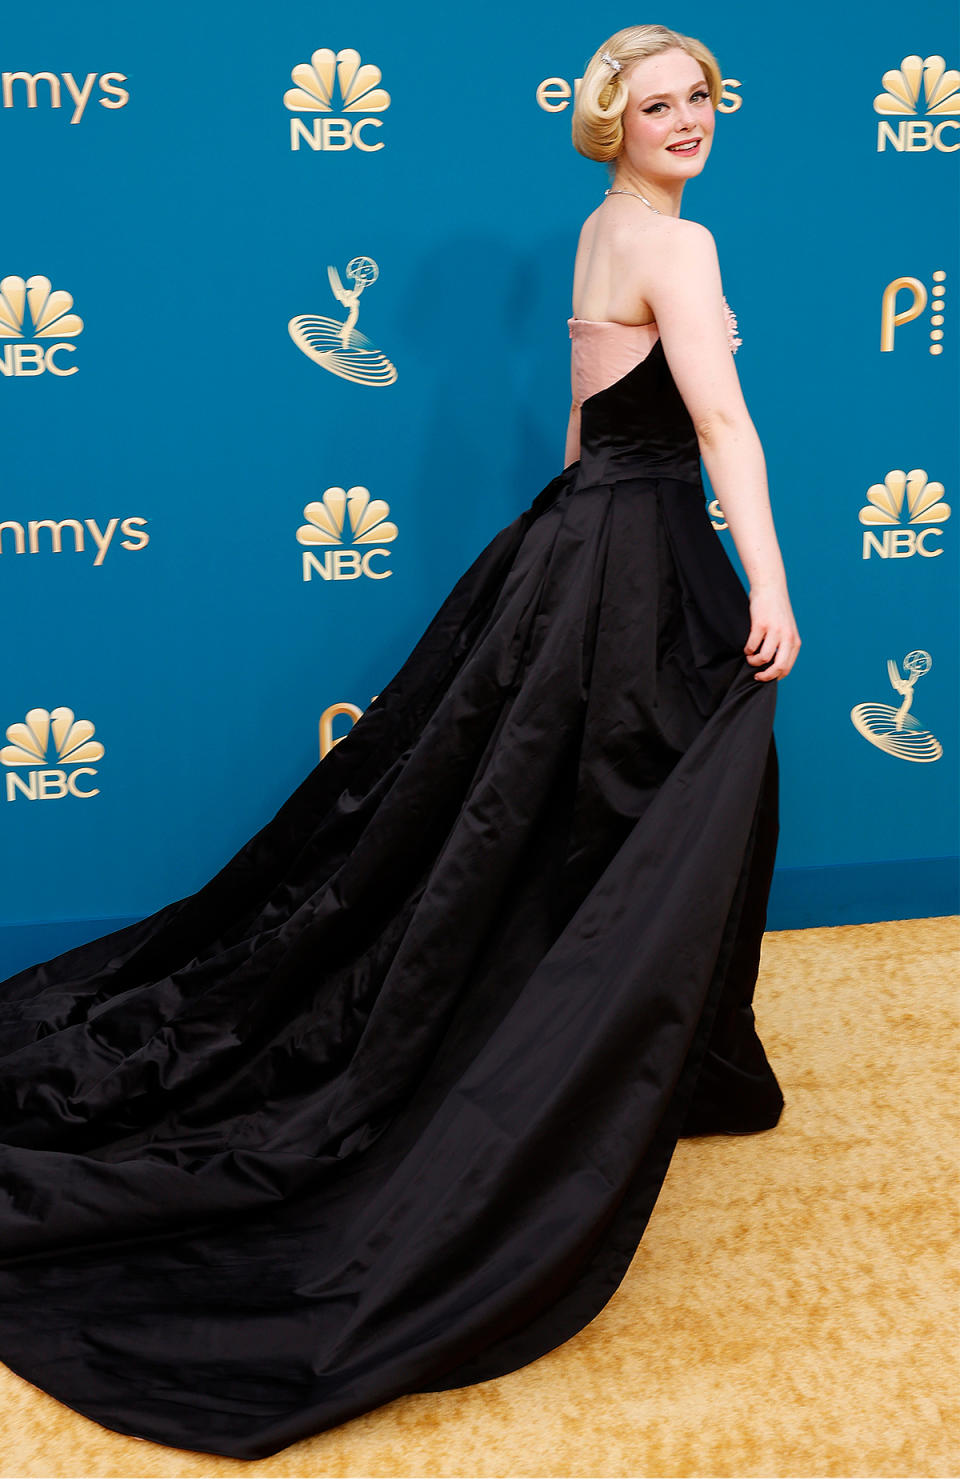 The Best Dressed Stars at the 2022 Emmys